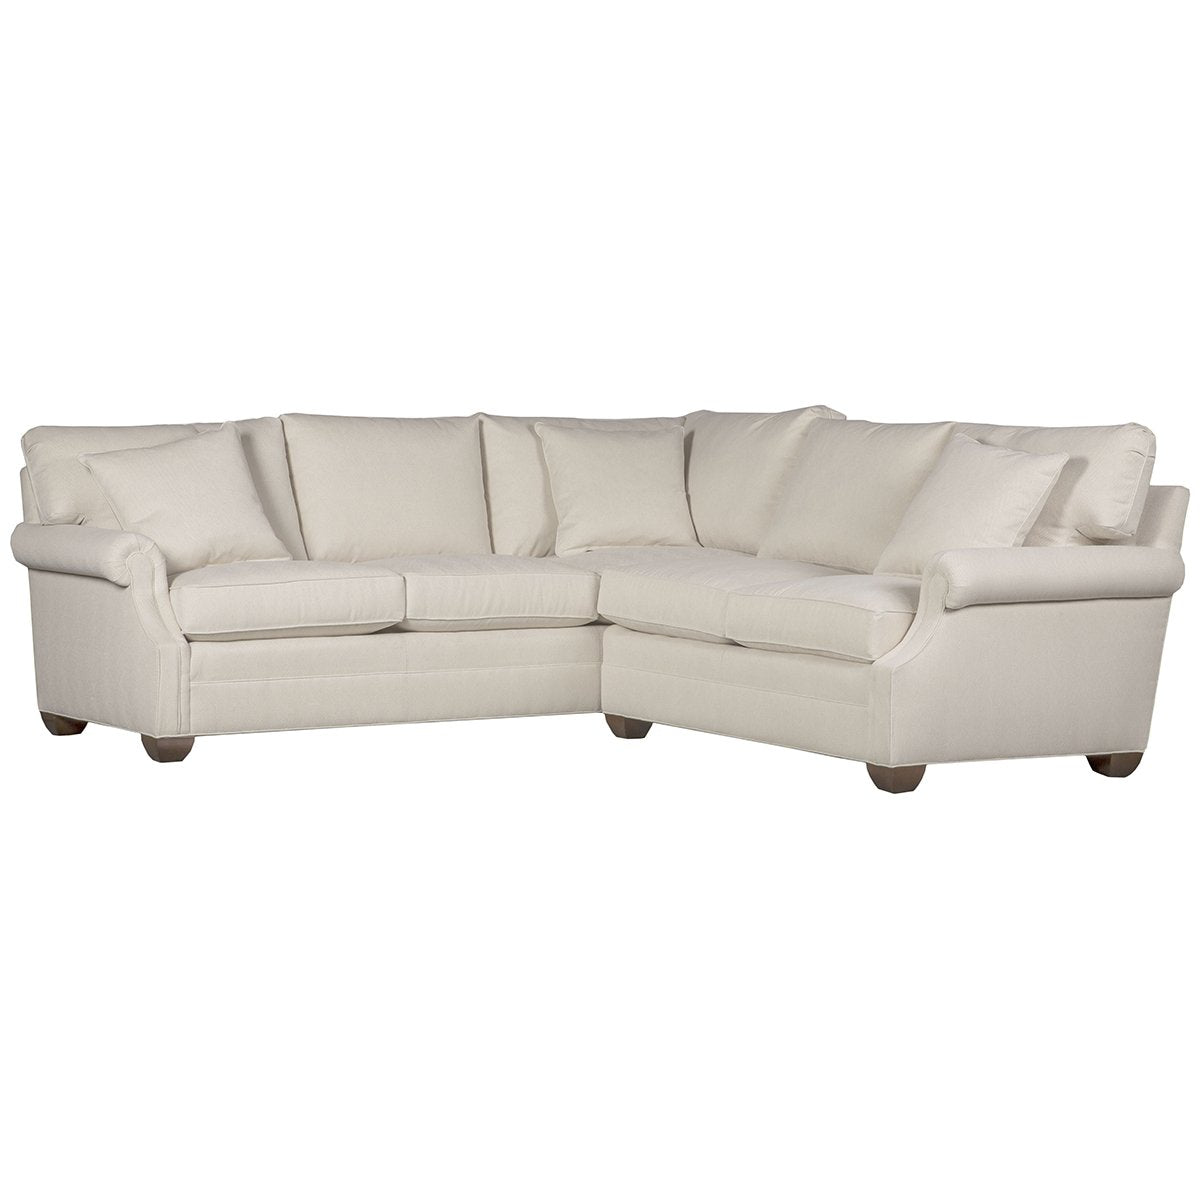 Vanguard Furniture Gutherly Sectional